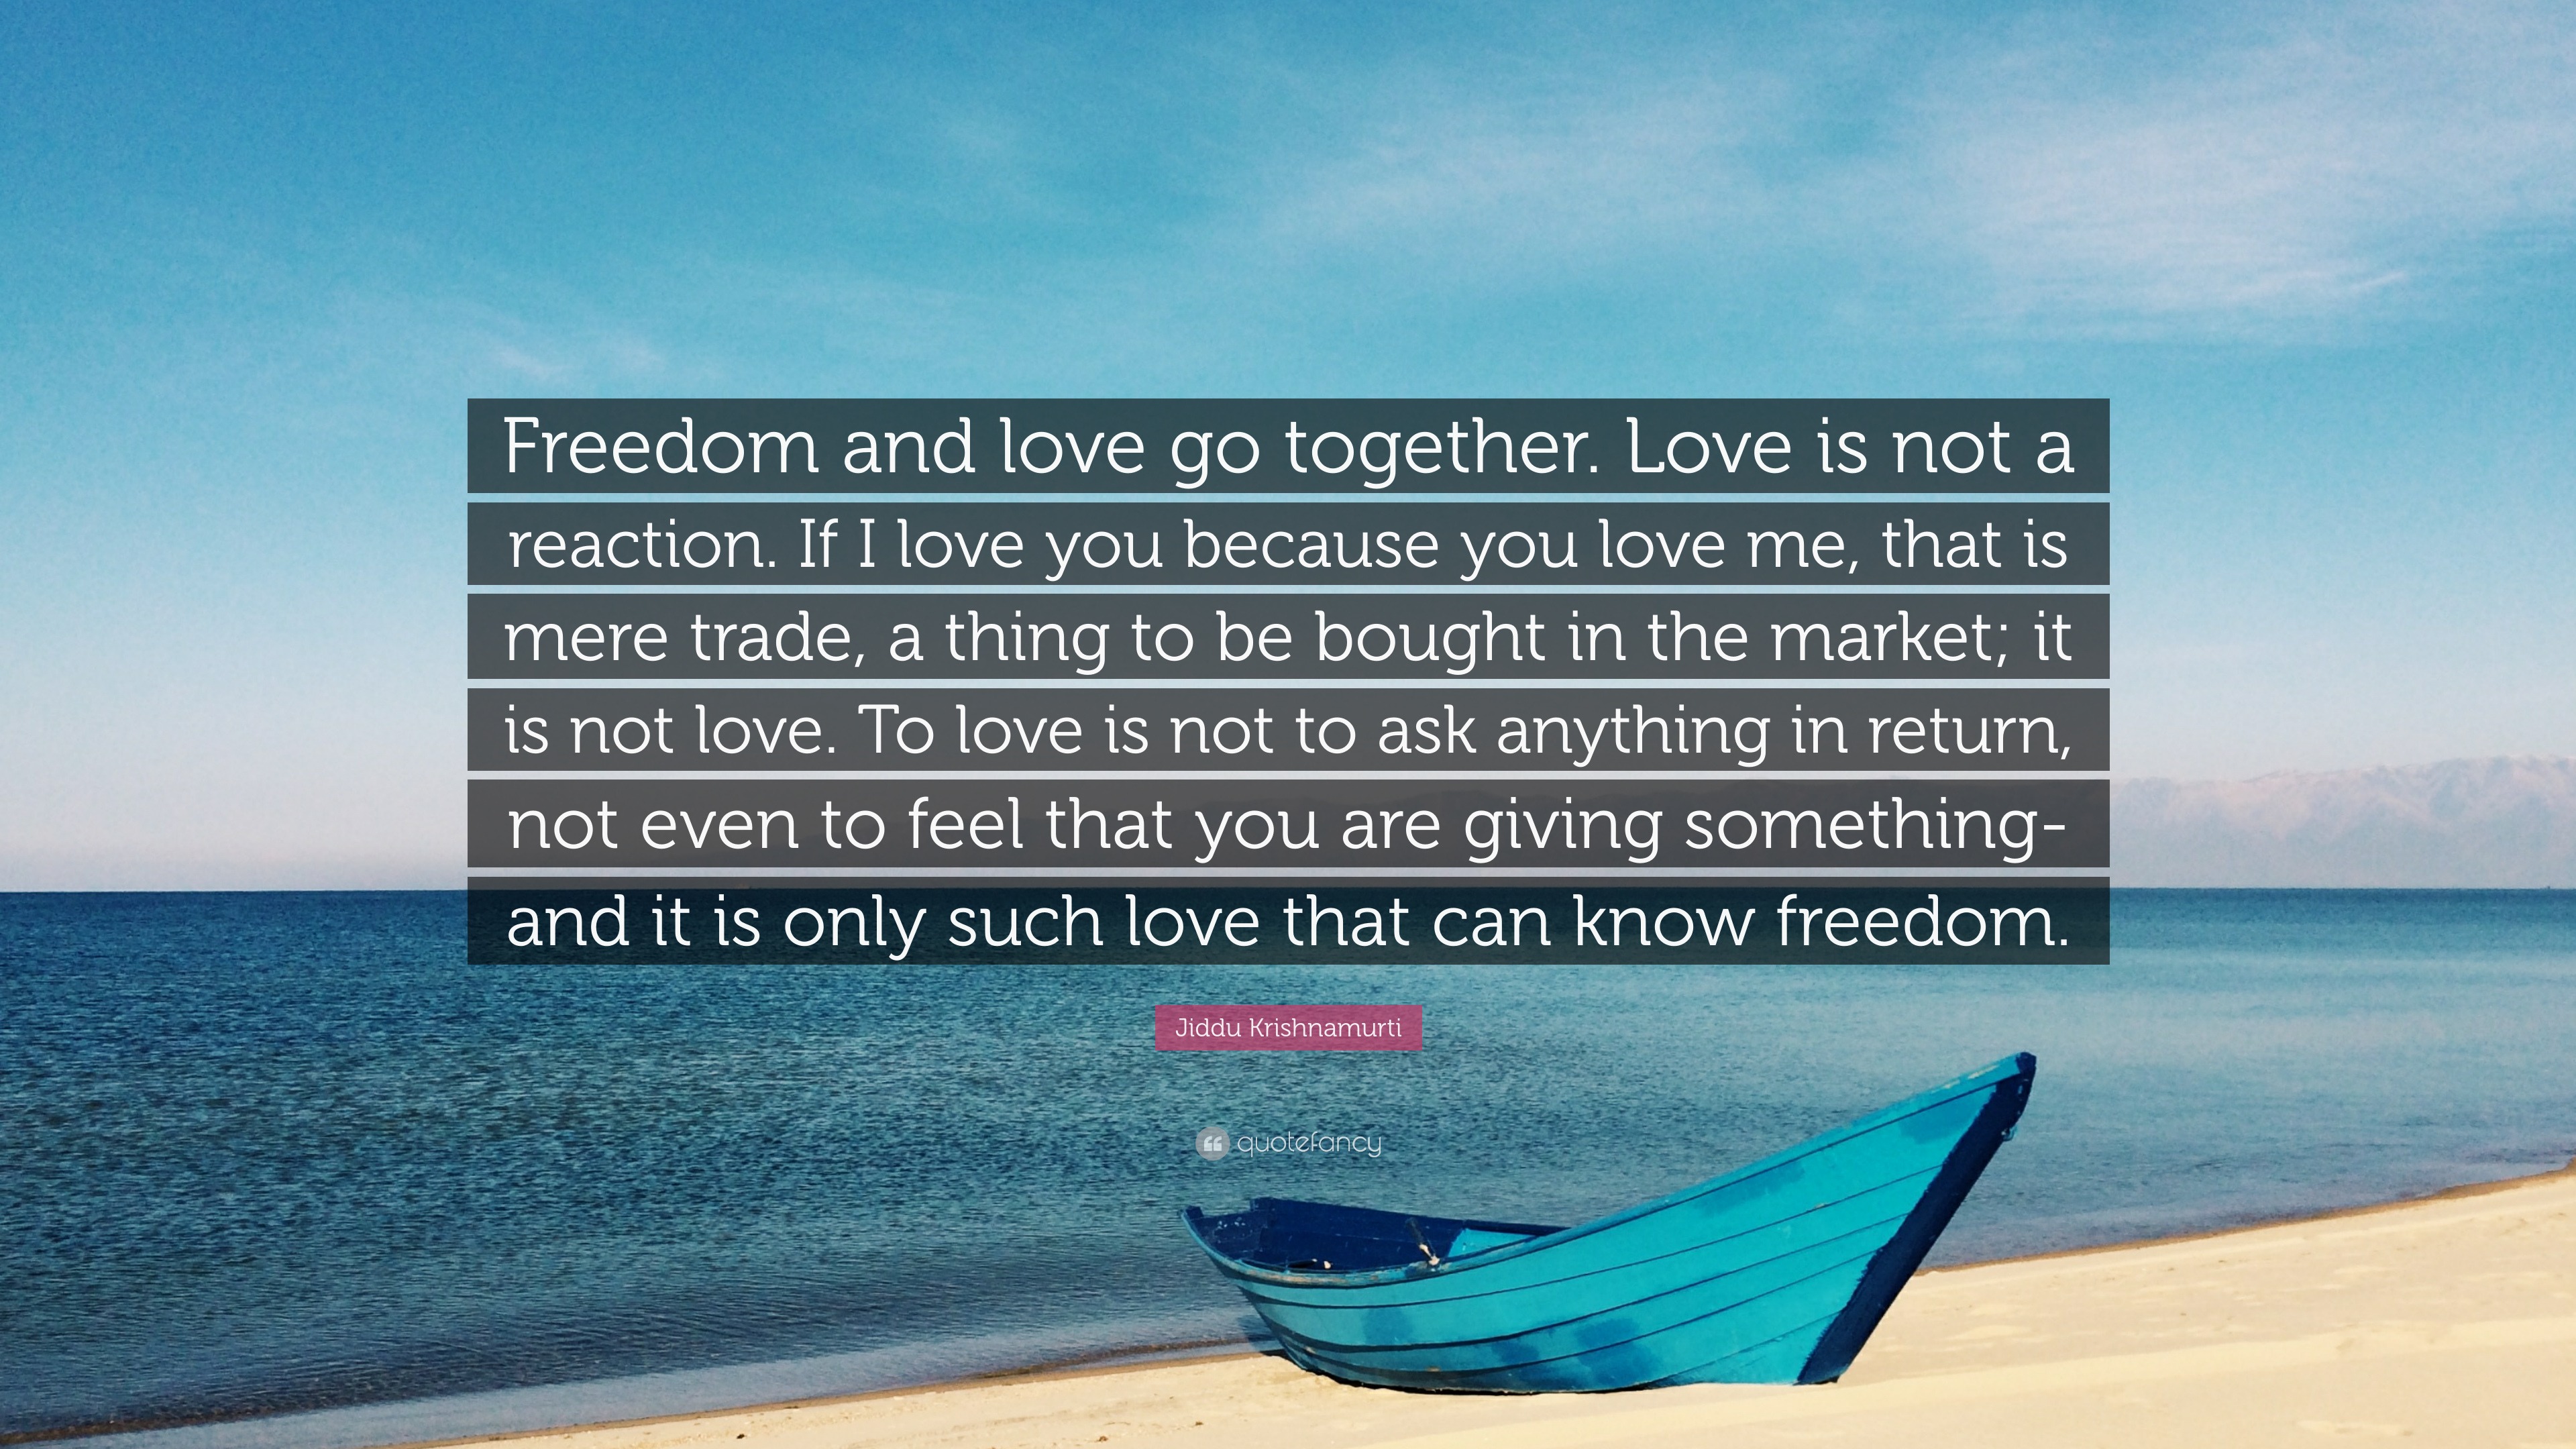 Jiddu Krishnamurti Quote “Freedom and love go to her Love is not a reaction